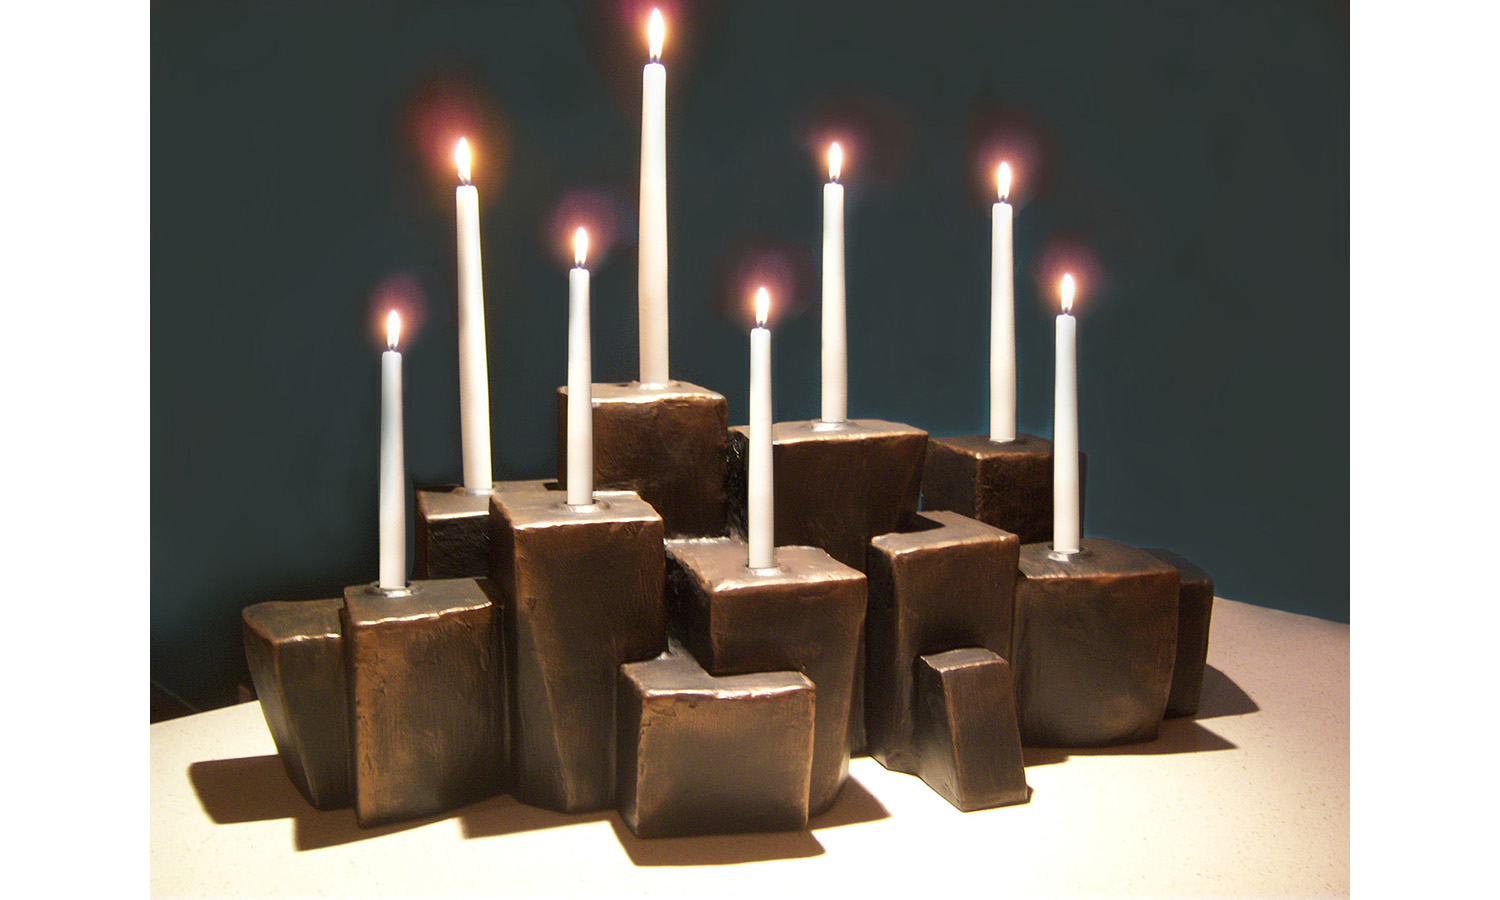 ABITARE CANDLE HOLDER, mixed media, 21" x 13" x 12", 2012